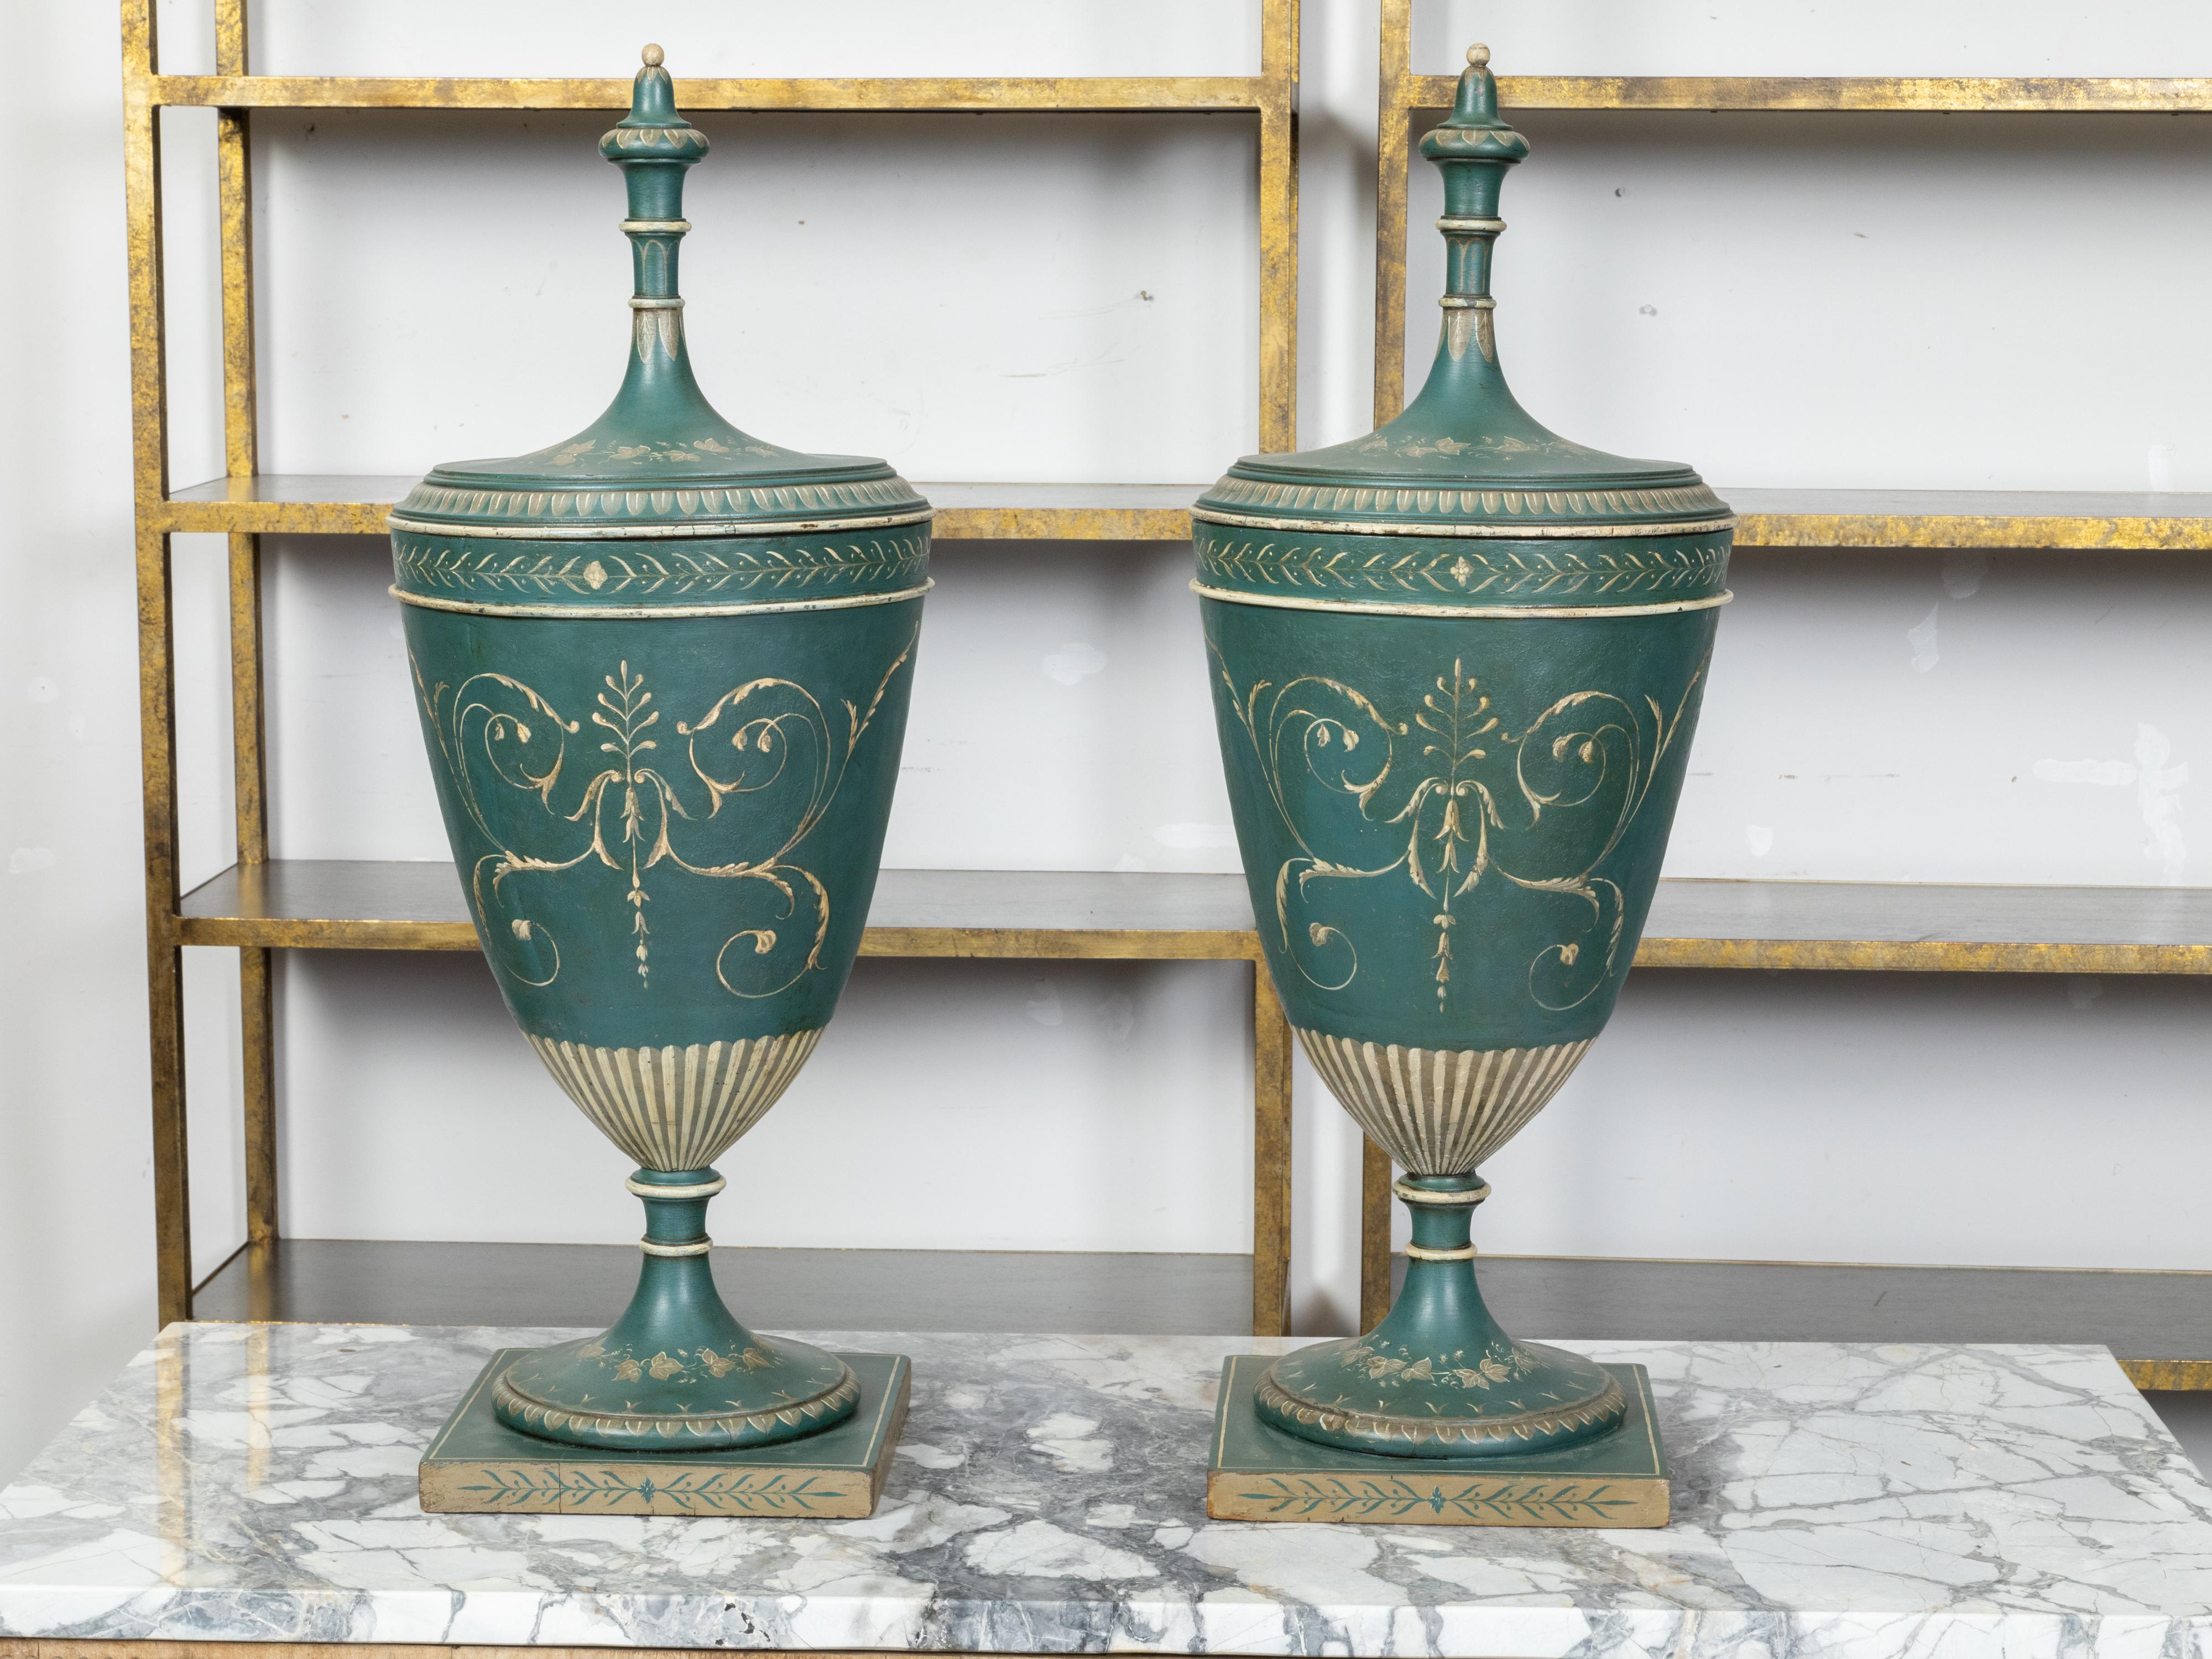 A pair of English Neoclassical green painted tôle lidded urns from the 19th century, with scrolling foliage and palmettes, friezes of waterleaves, campanula and ivy. Created in England during the 19th century, each of this pair of urns captures our